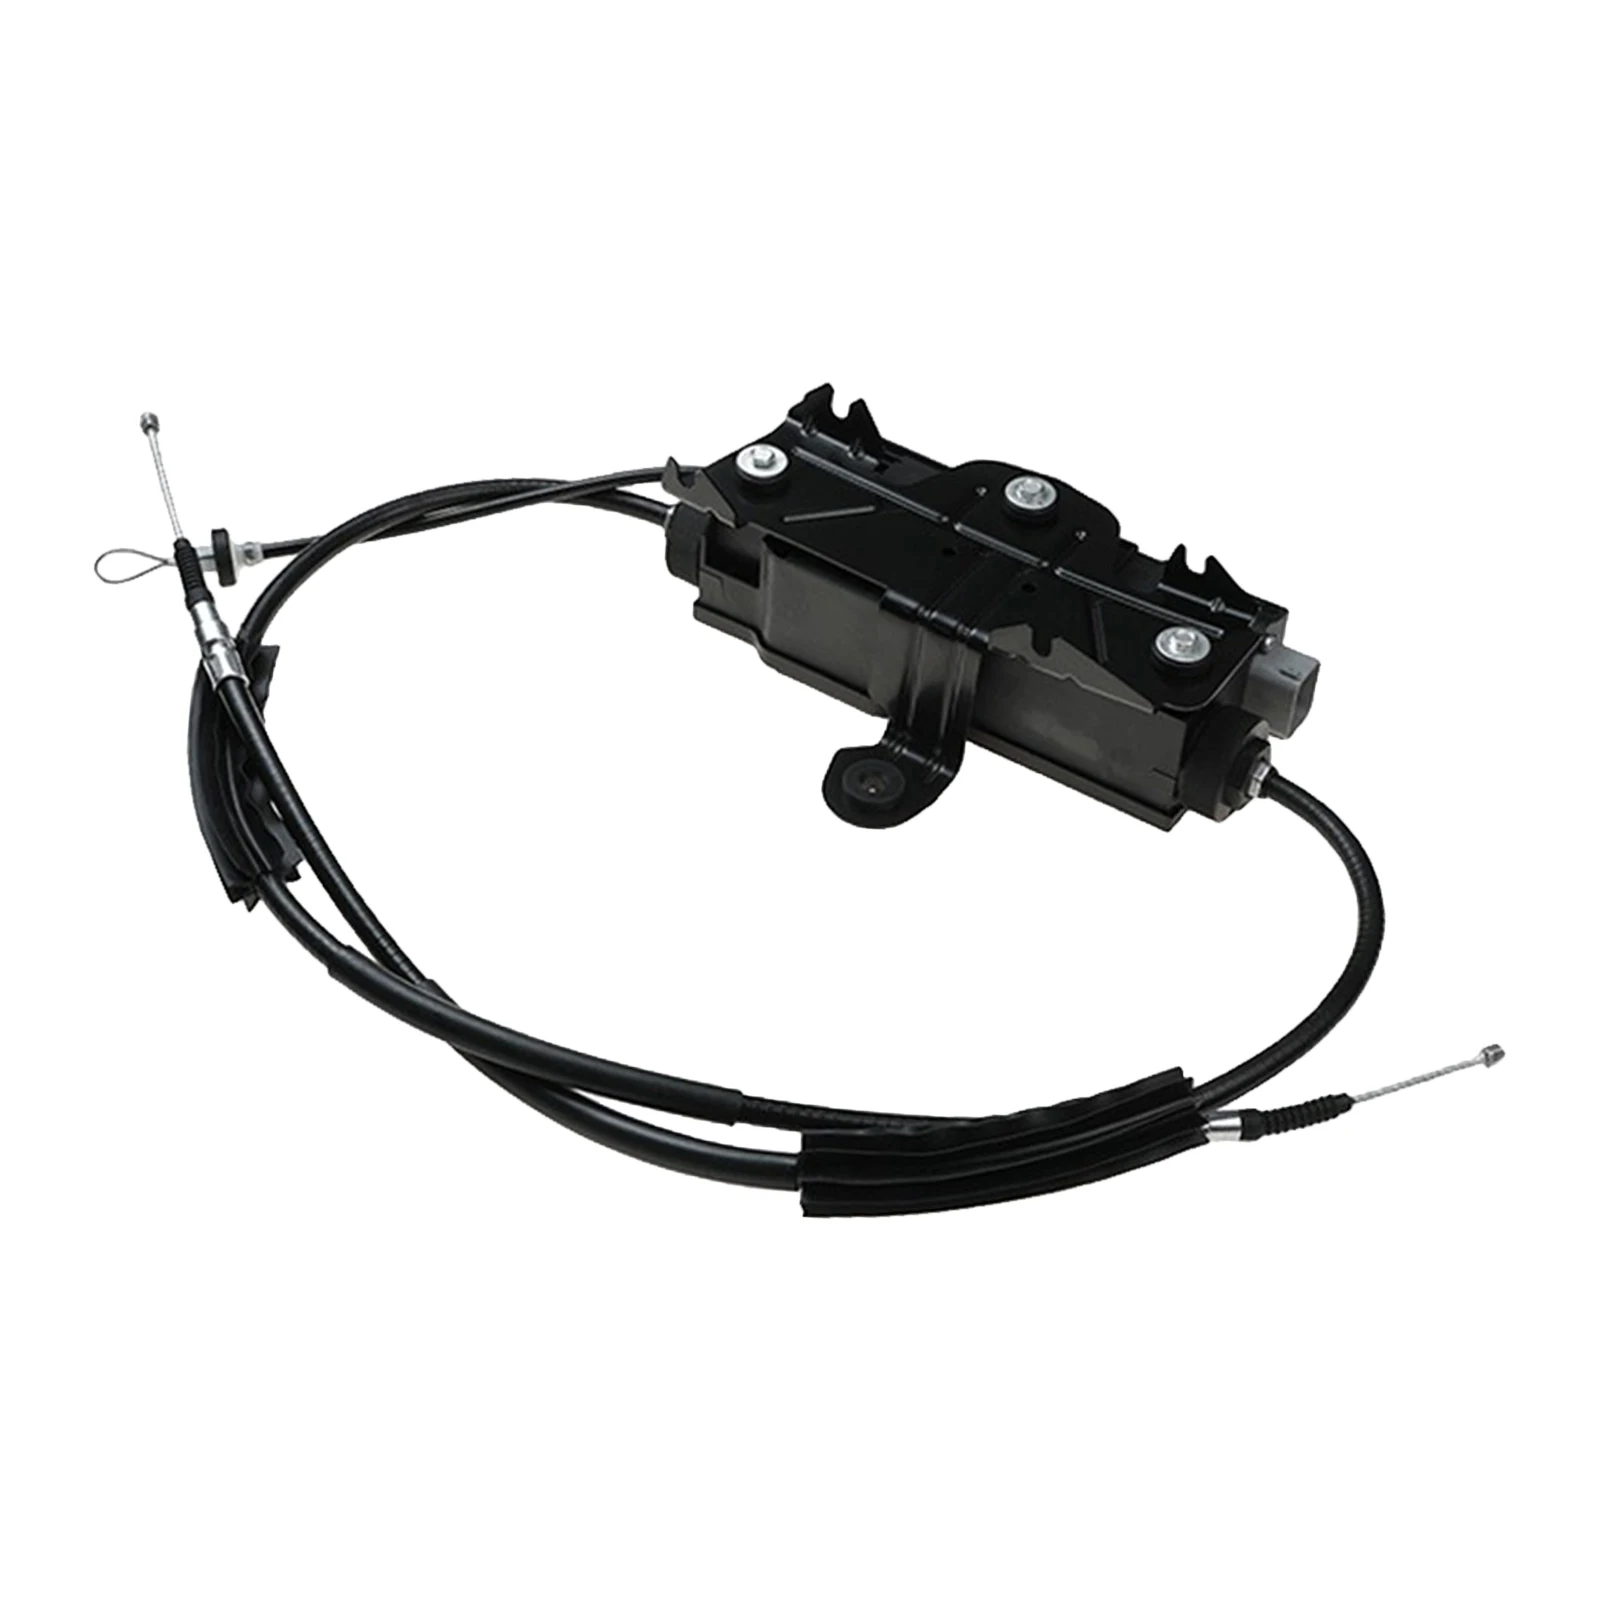 Park Brake Module, Hand Brake Actuator, Parking Brake Actuator With Control Unit, Fit for BMW 7 Series F01 F02 F04 34436877316